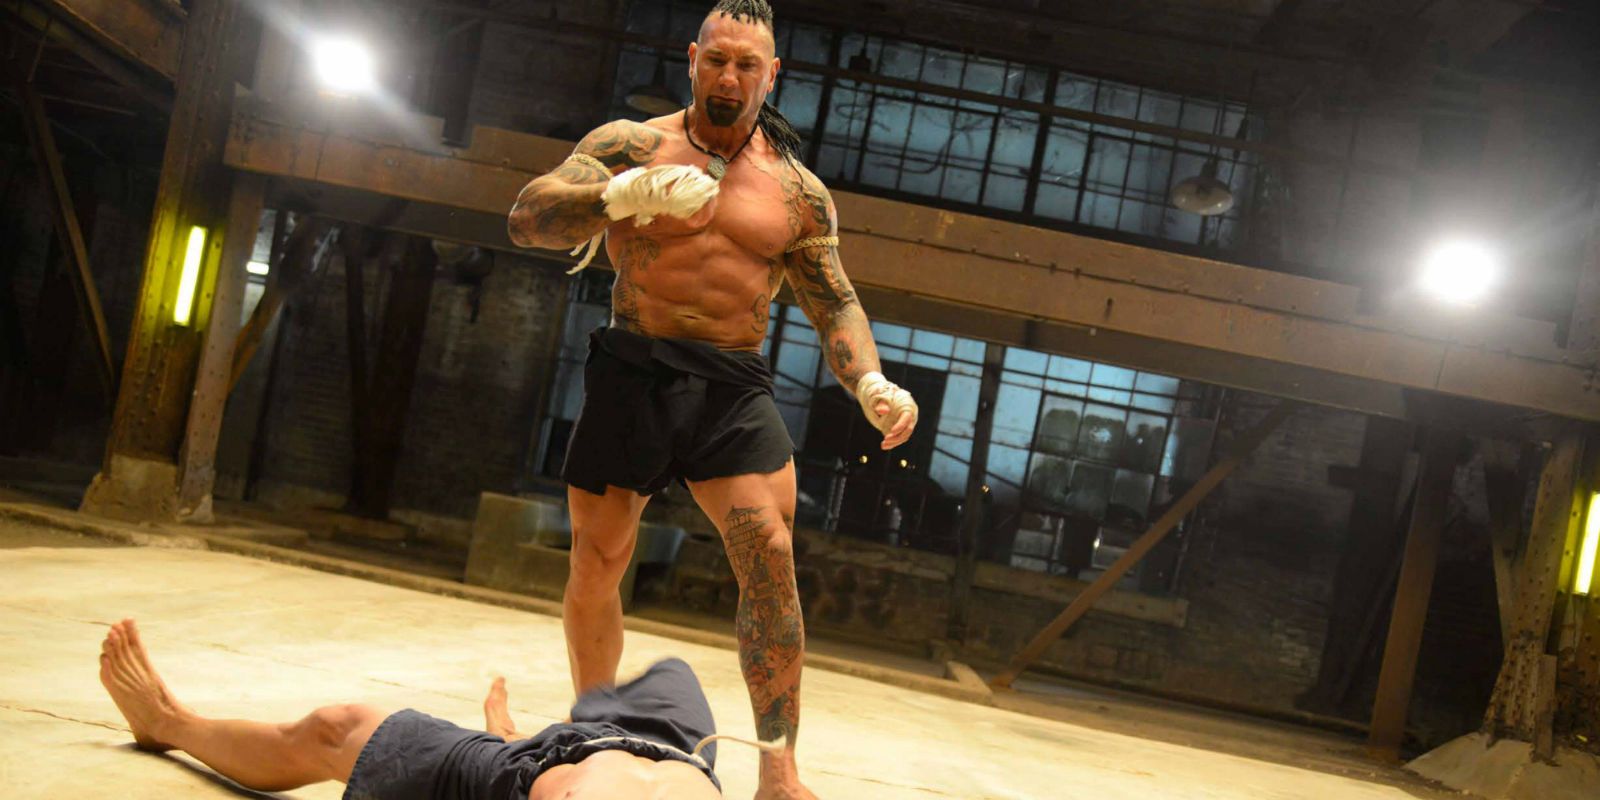 DAVE BAUTISTA POSTER WWE MARTIAL ARTS ACTOR WEIGHTLIFTING GYM PICTURE WALL ART 